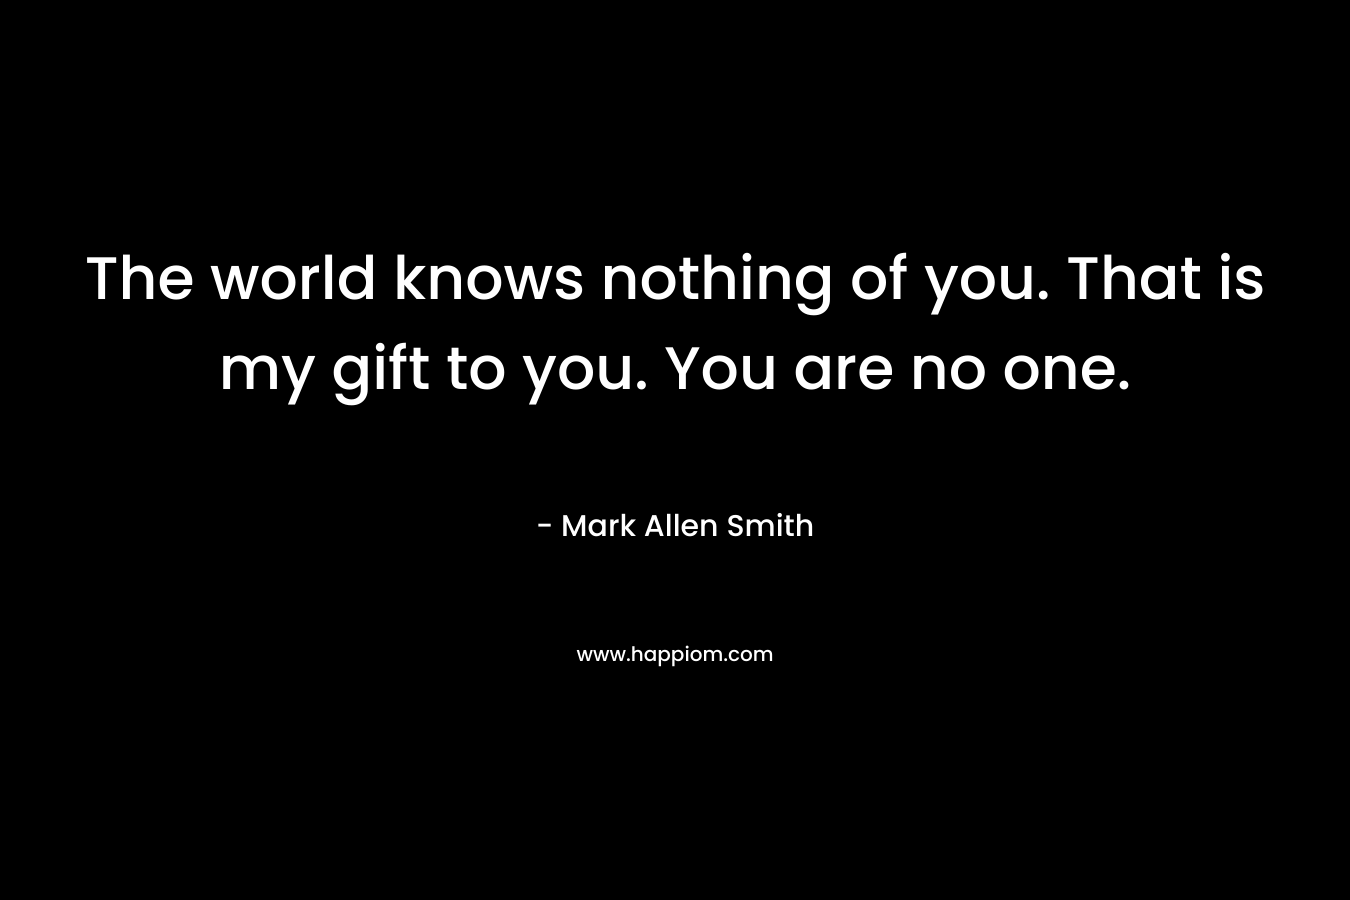 The world knows nothing of you. That is my gift to you. You are no one.